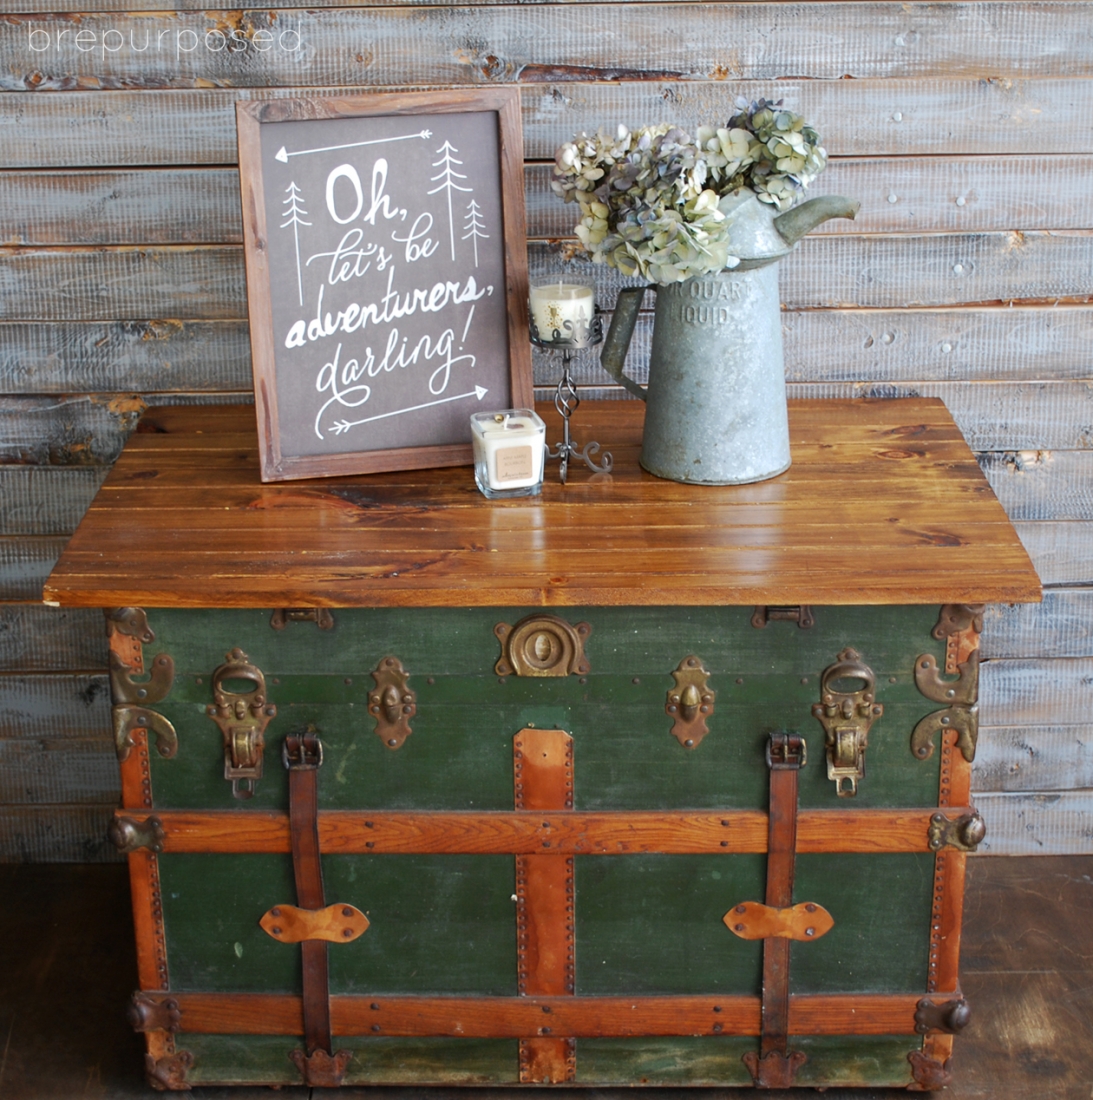 Antique Steamer Trunk Turned Coffee, How To Turn An Old Trunk Into A Coffee Table